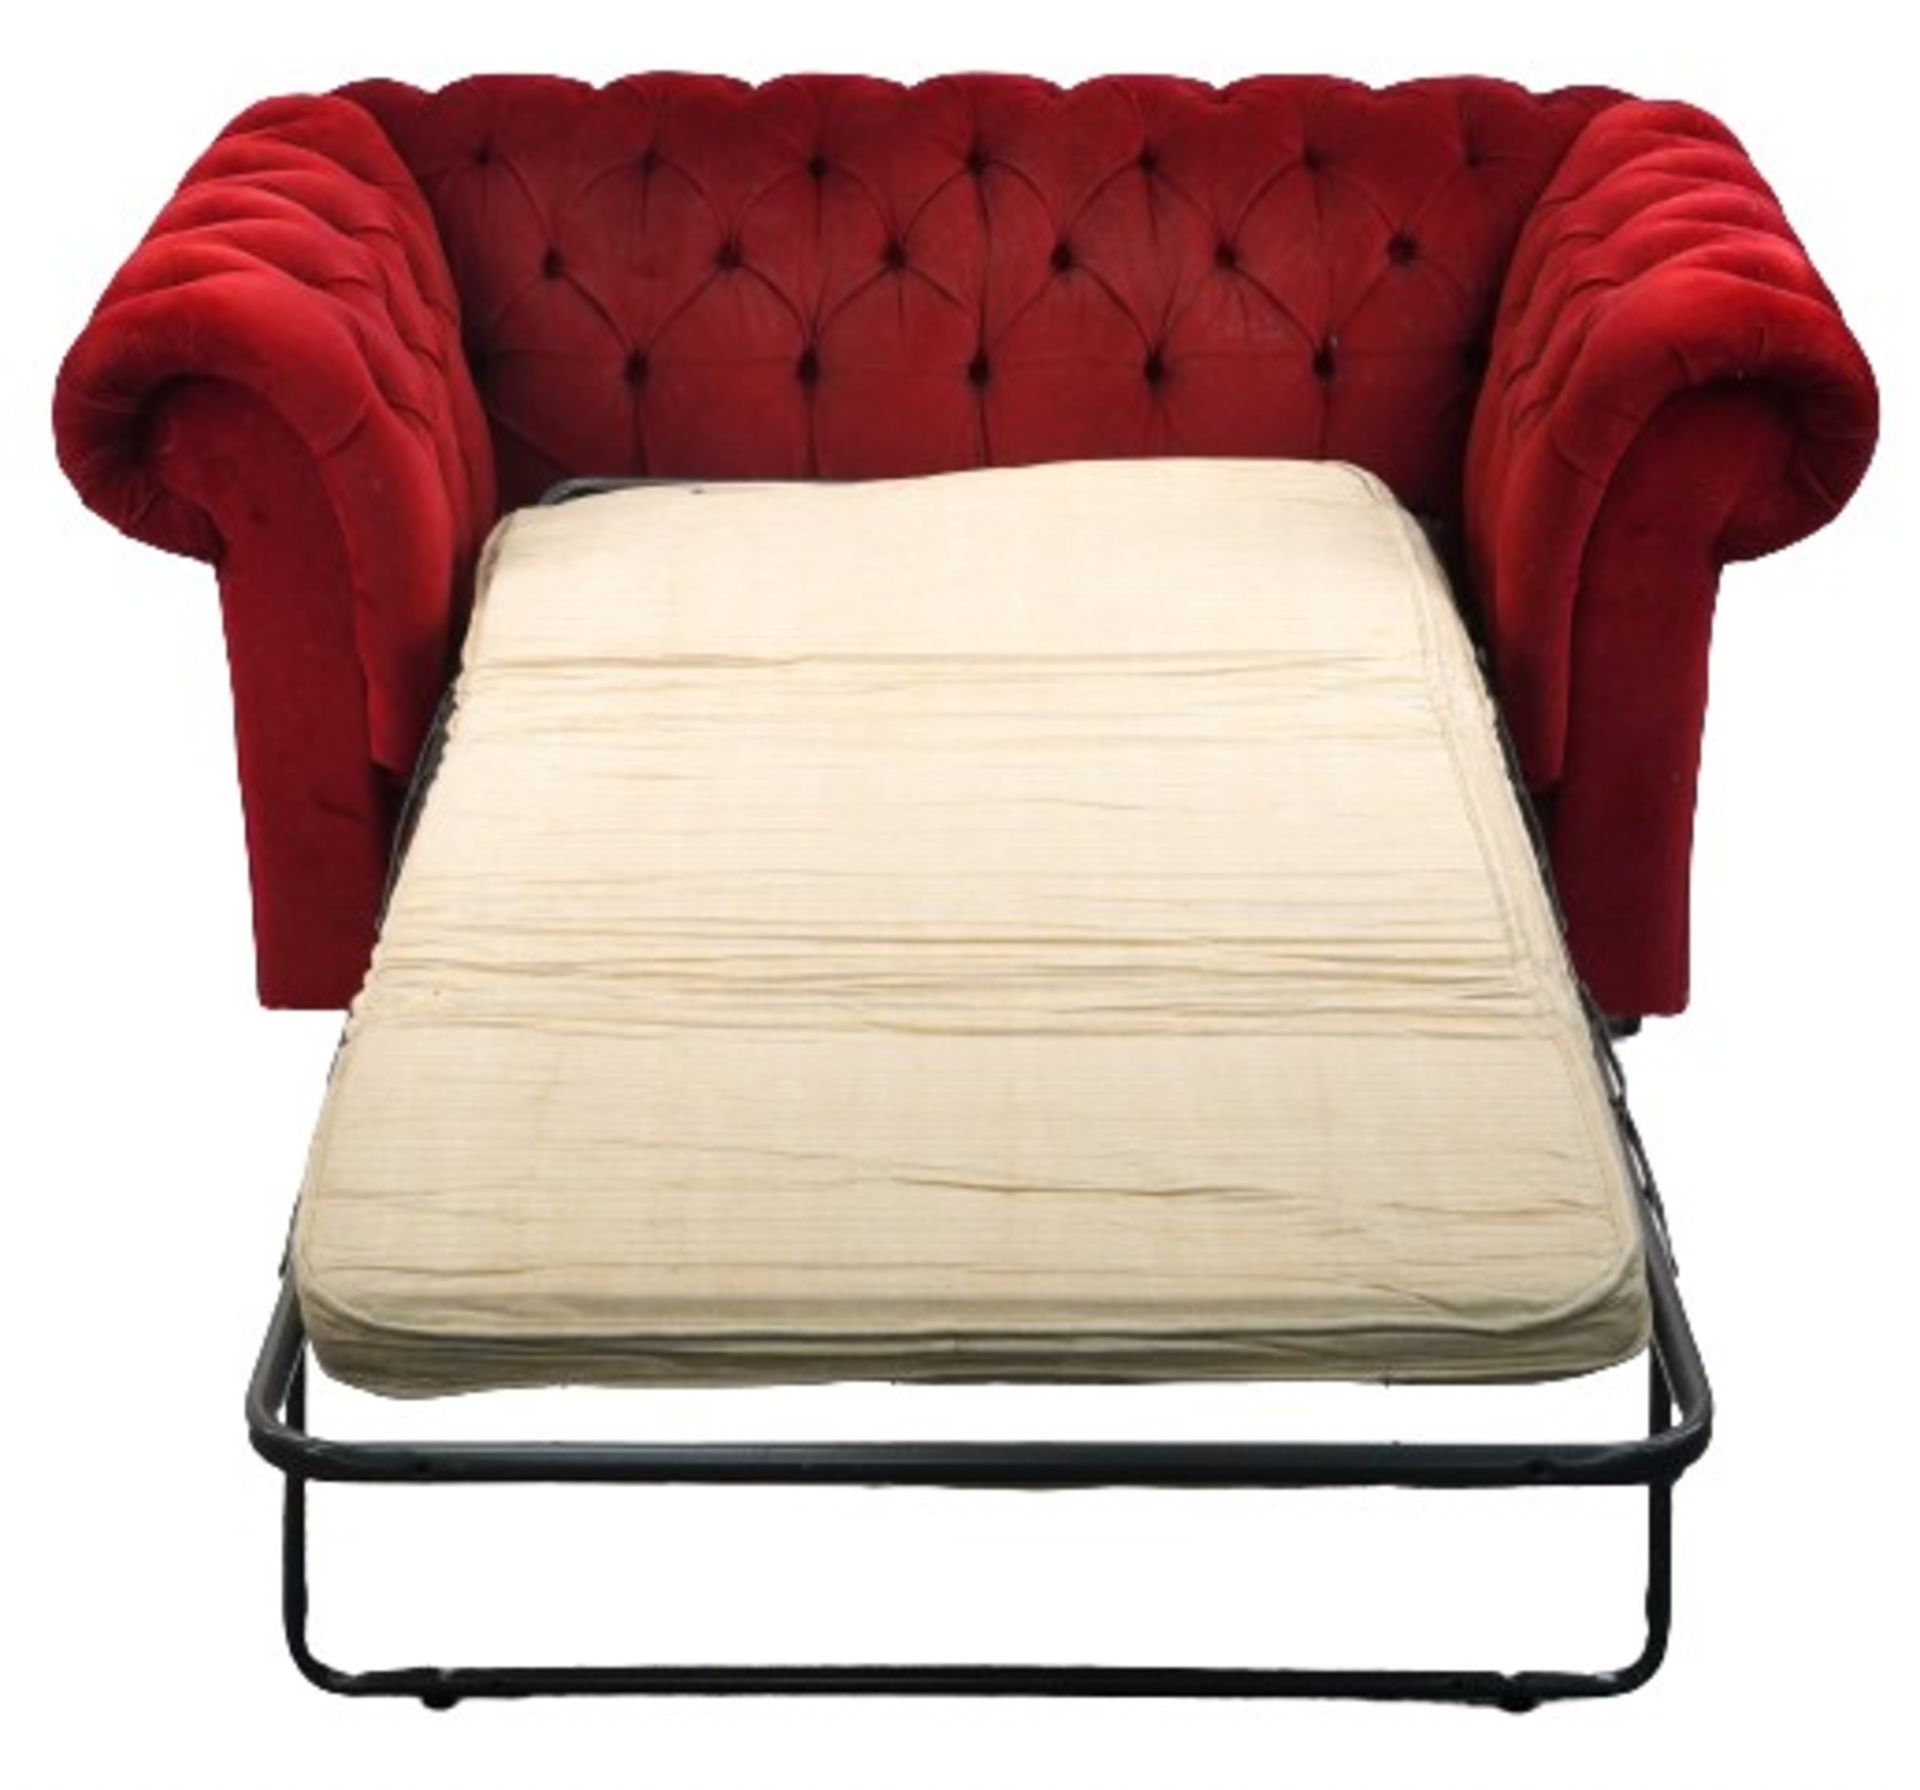 Chesterfield two seater settee/sofa bed with red button back upholstery, 73cm H x 152cm W x 88cm D - Bild 2 aus 4